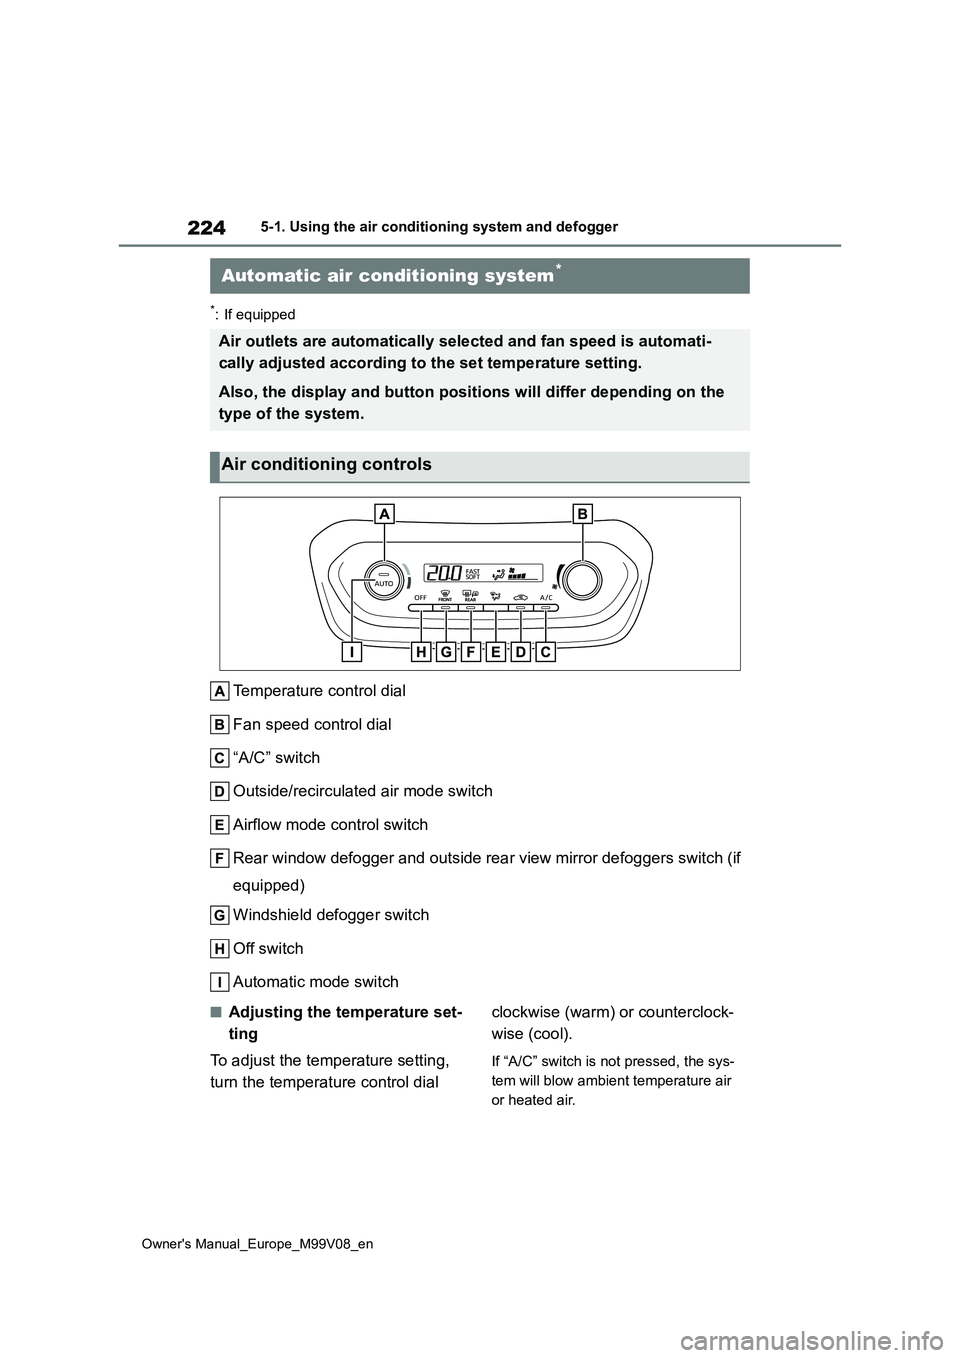 TOYOTA AYGO X 2022  Owners Manual (in English) 224
Owner's Manual_Europe_M99V08_en
5-1. Using the air conditioning system and defogger
*: If equipped
Temperature control dial 
Fan speed control dial 
“A/C” switch 
Outside/recirculated air 